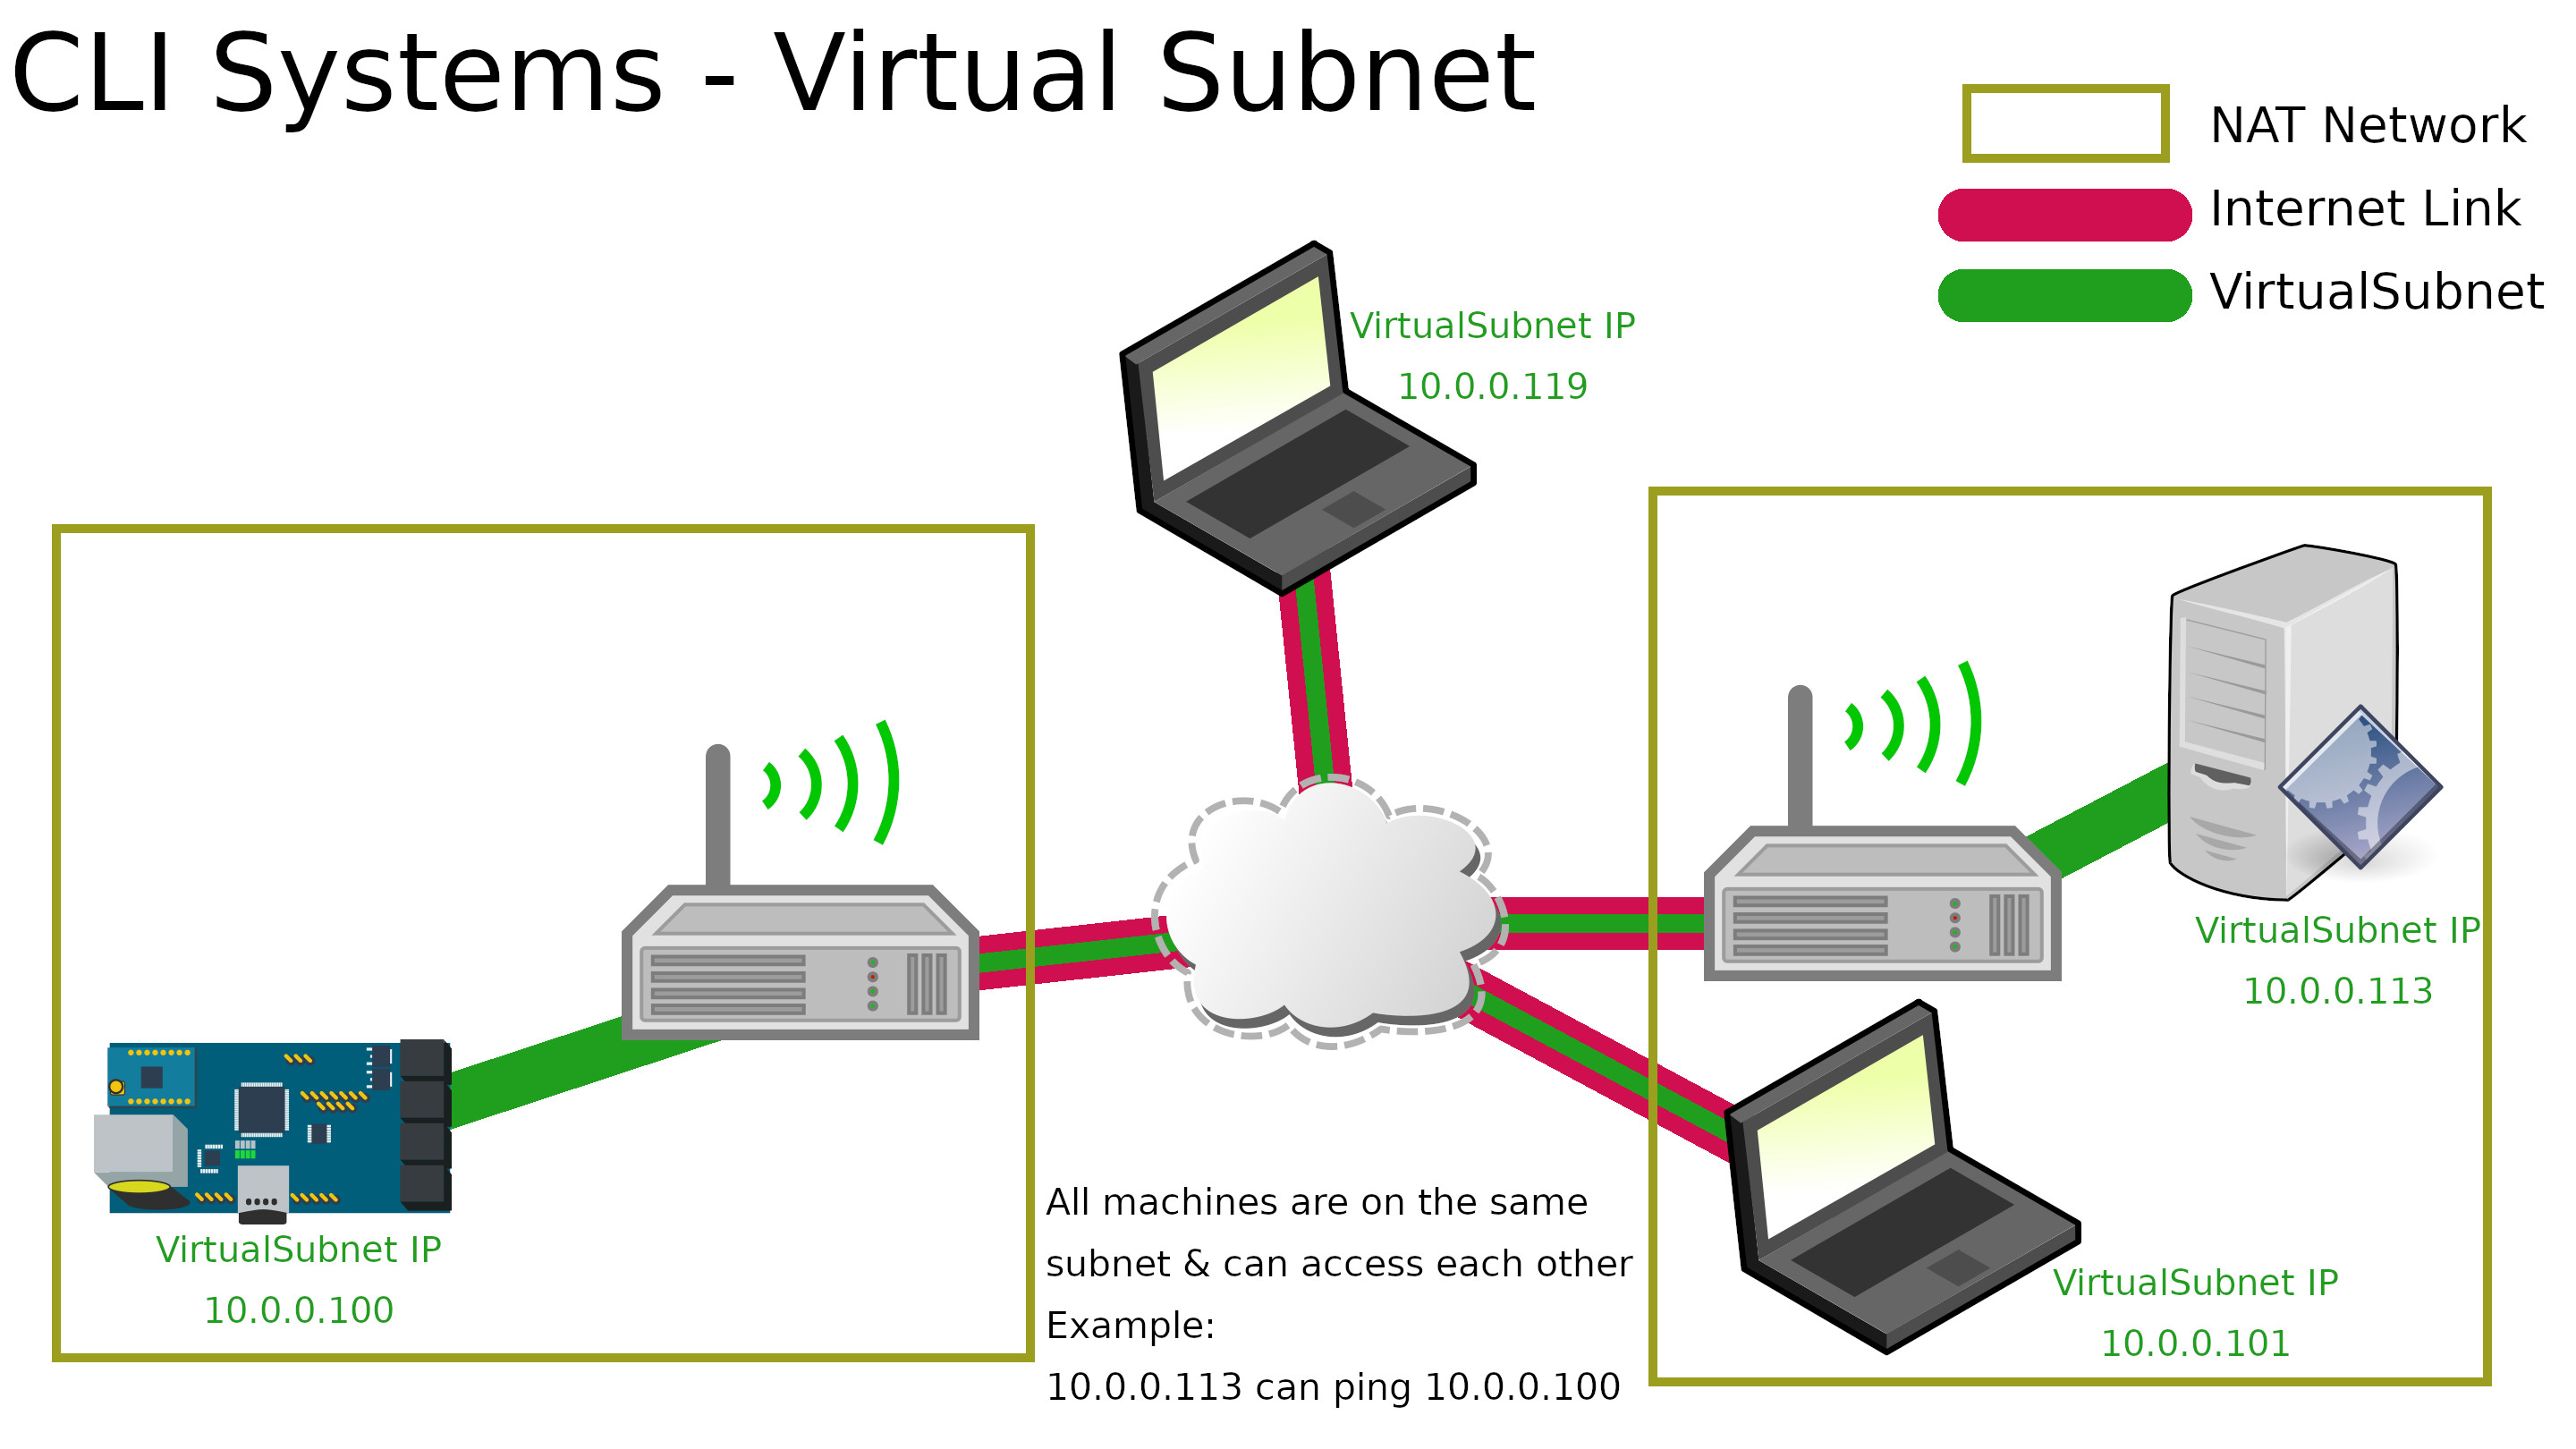 Virtual subnet diagram with 2 Node devices